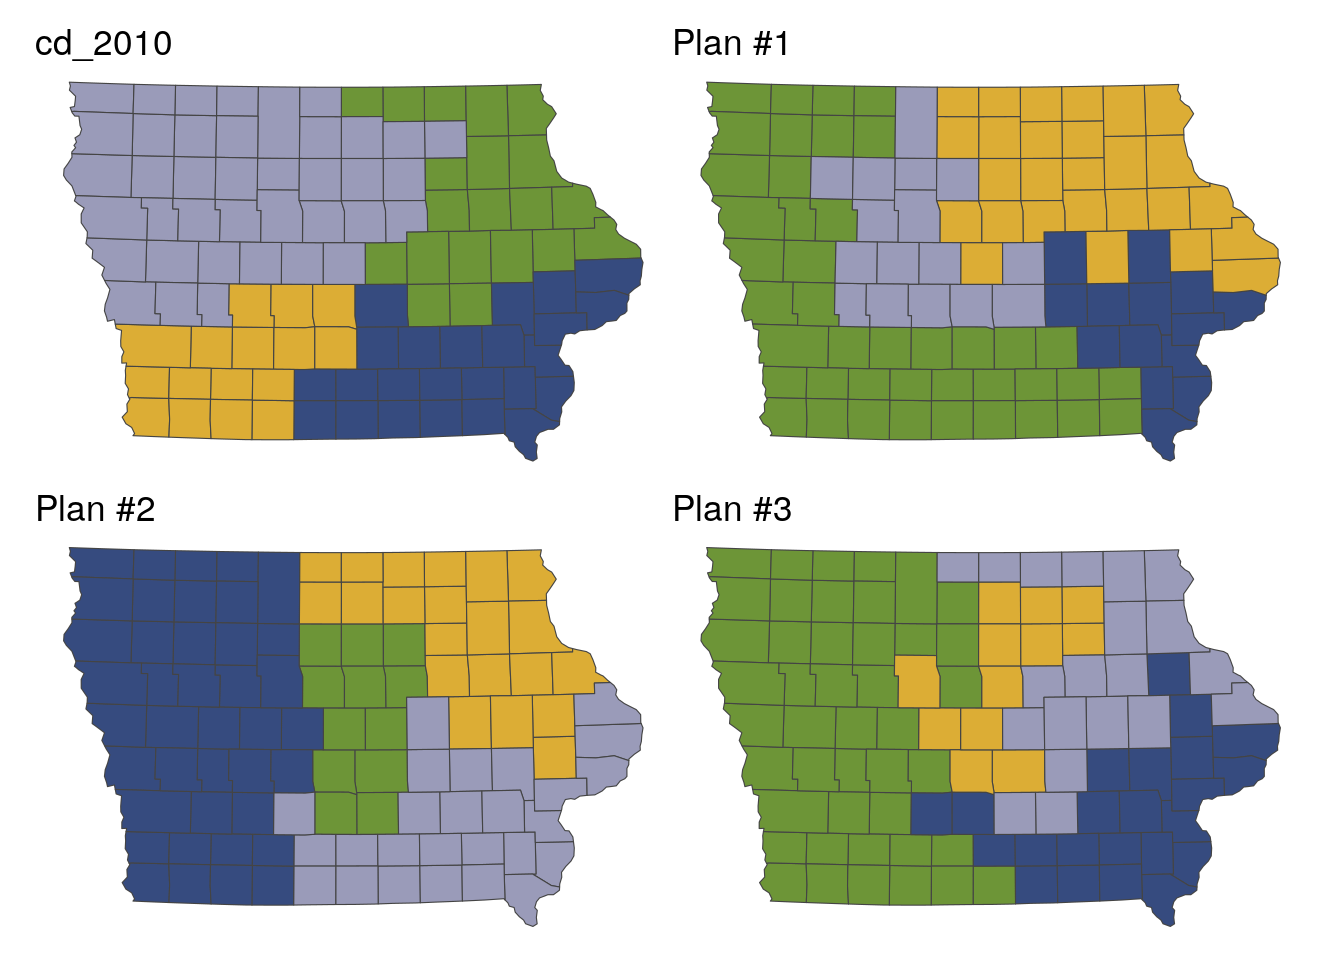 Example redistricting solutions using the redist package